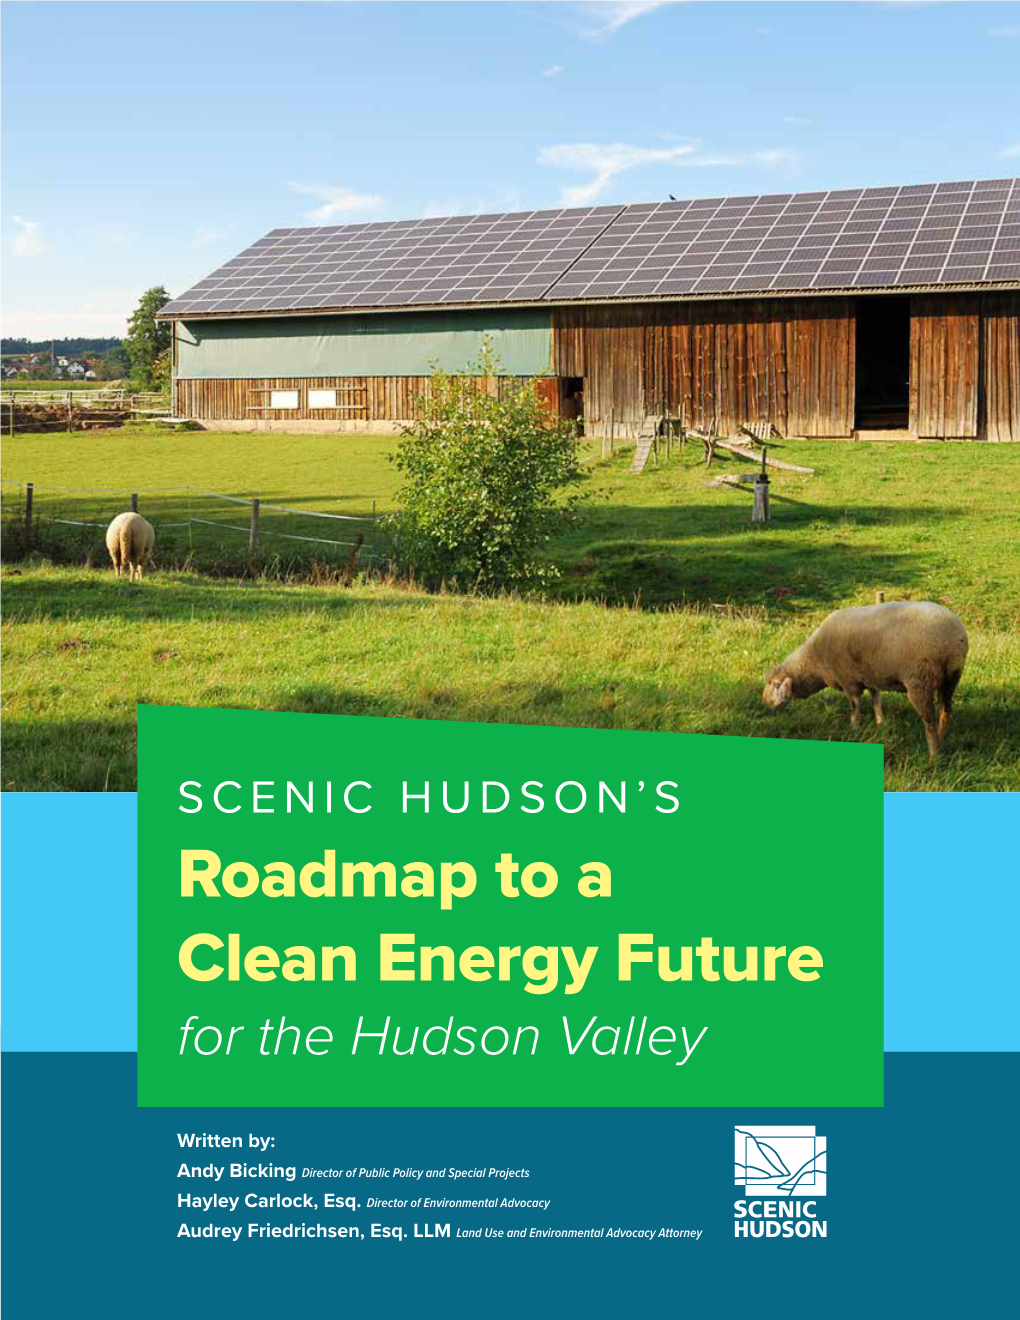 Roadmap to a Clean Energy Future for the Hudson Valley